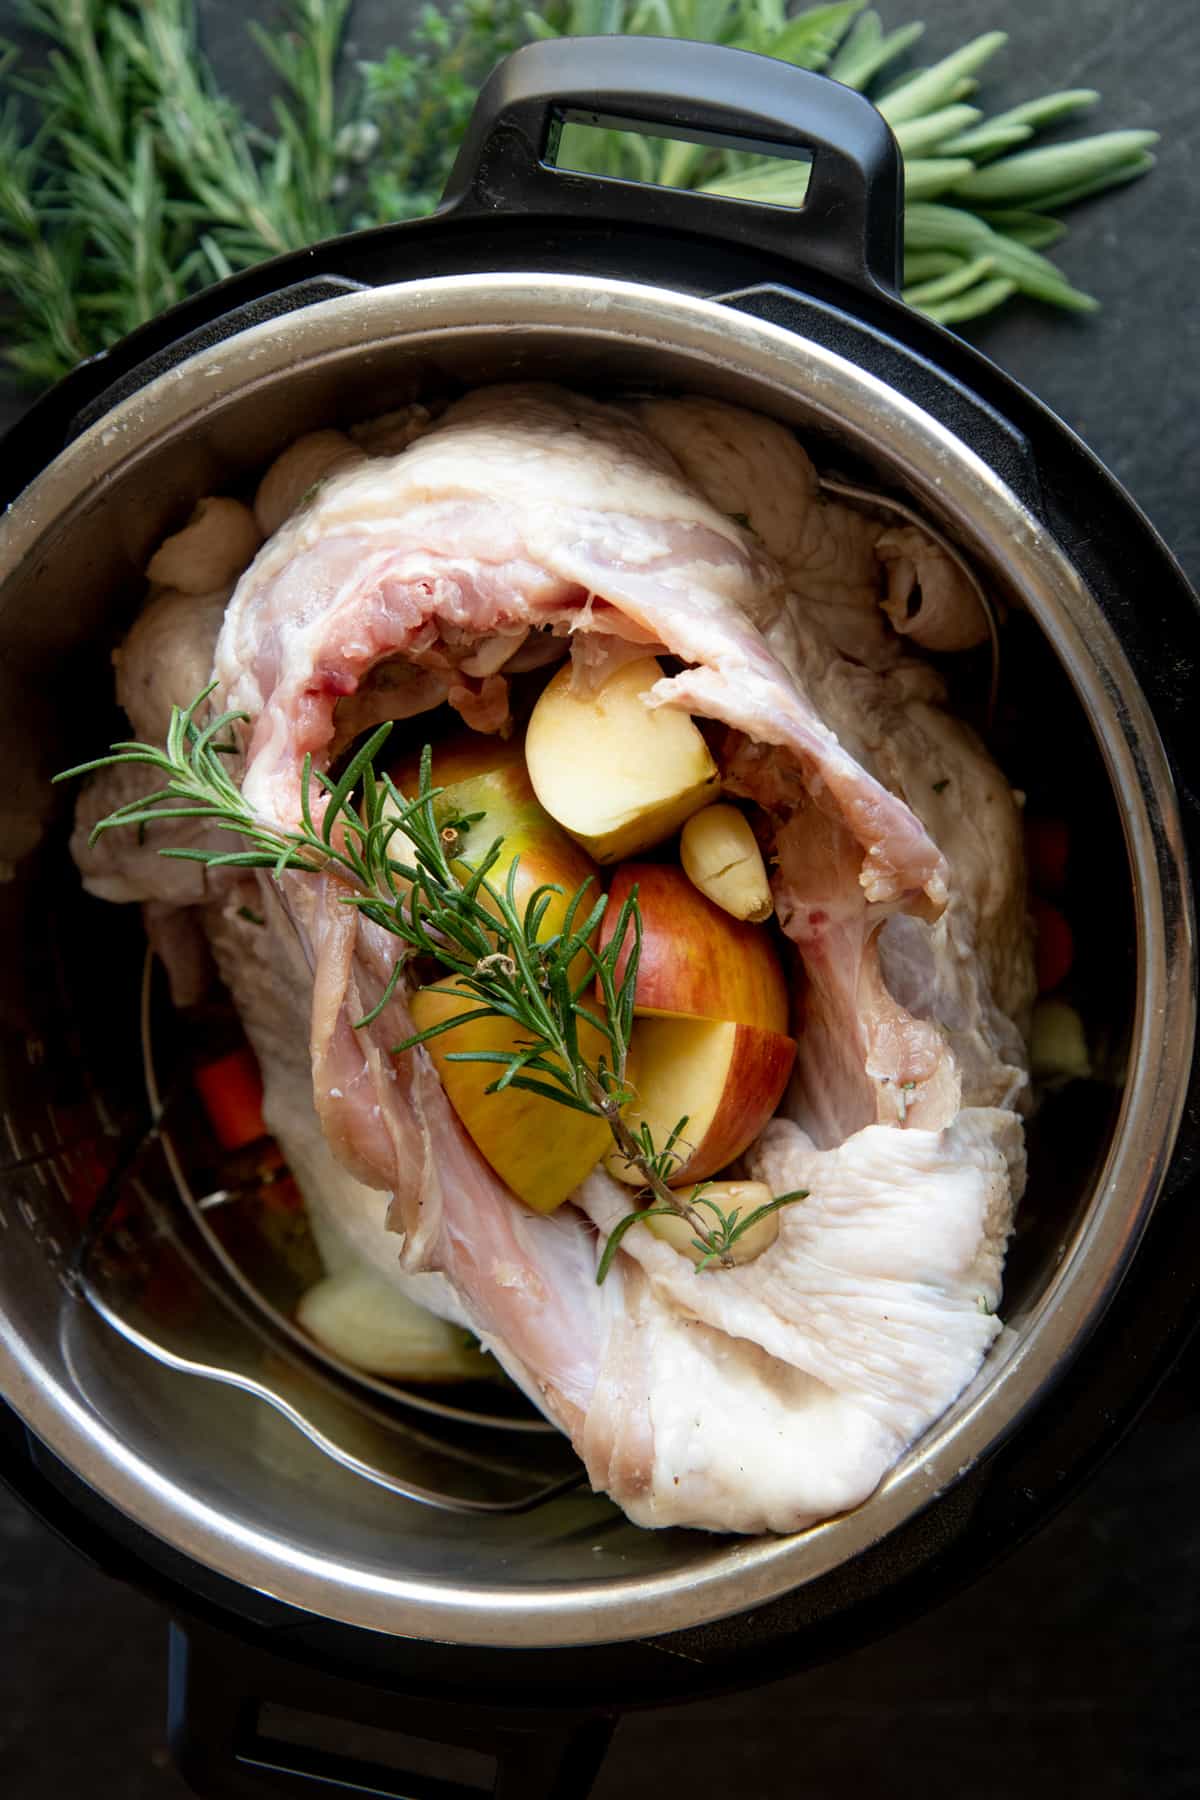 A turkey breast stuffed with aromatics sits in the basin of an electric pressure cooker, ready to be cooked.